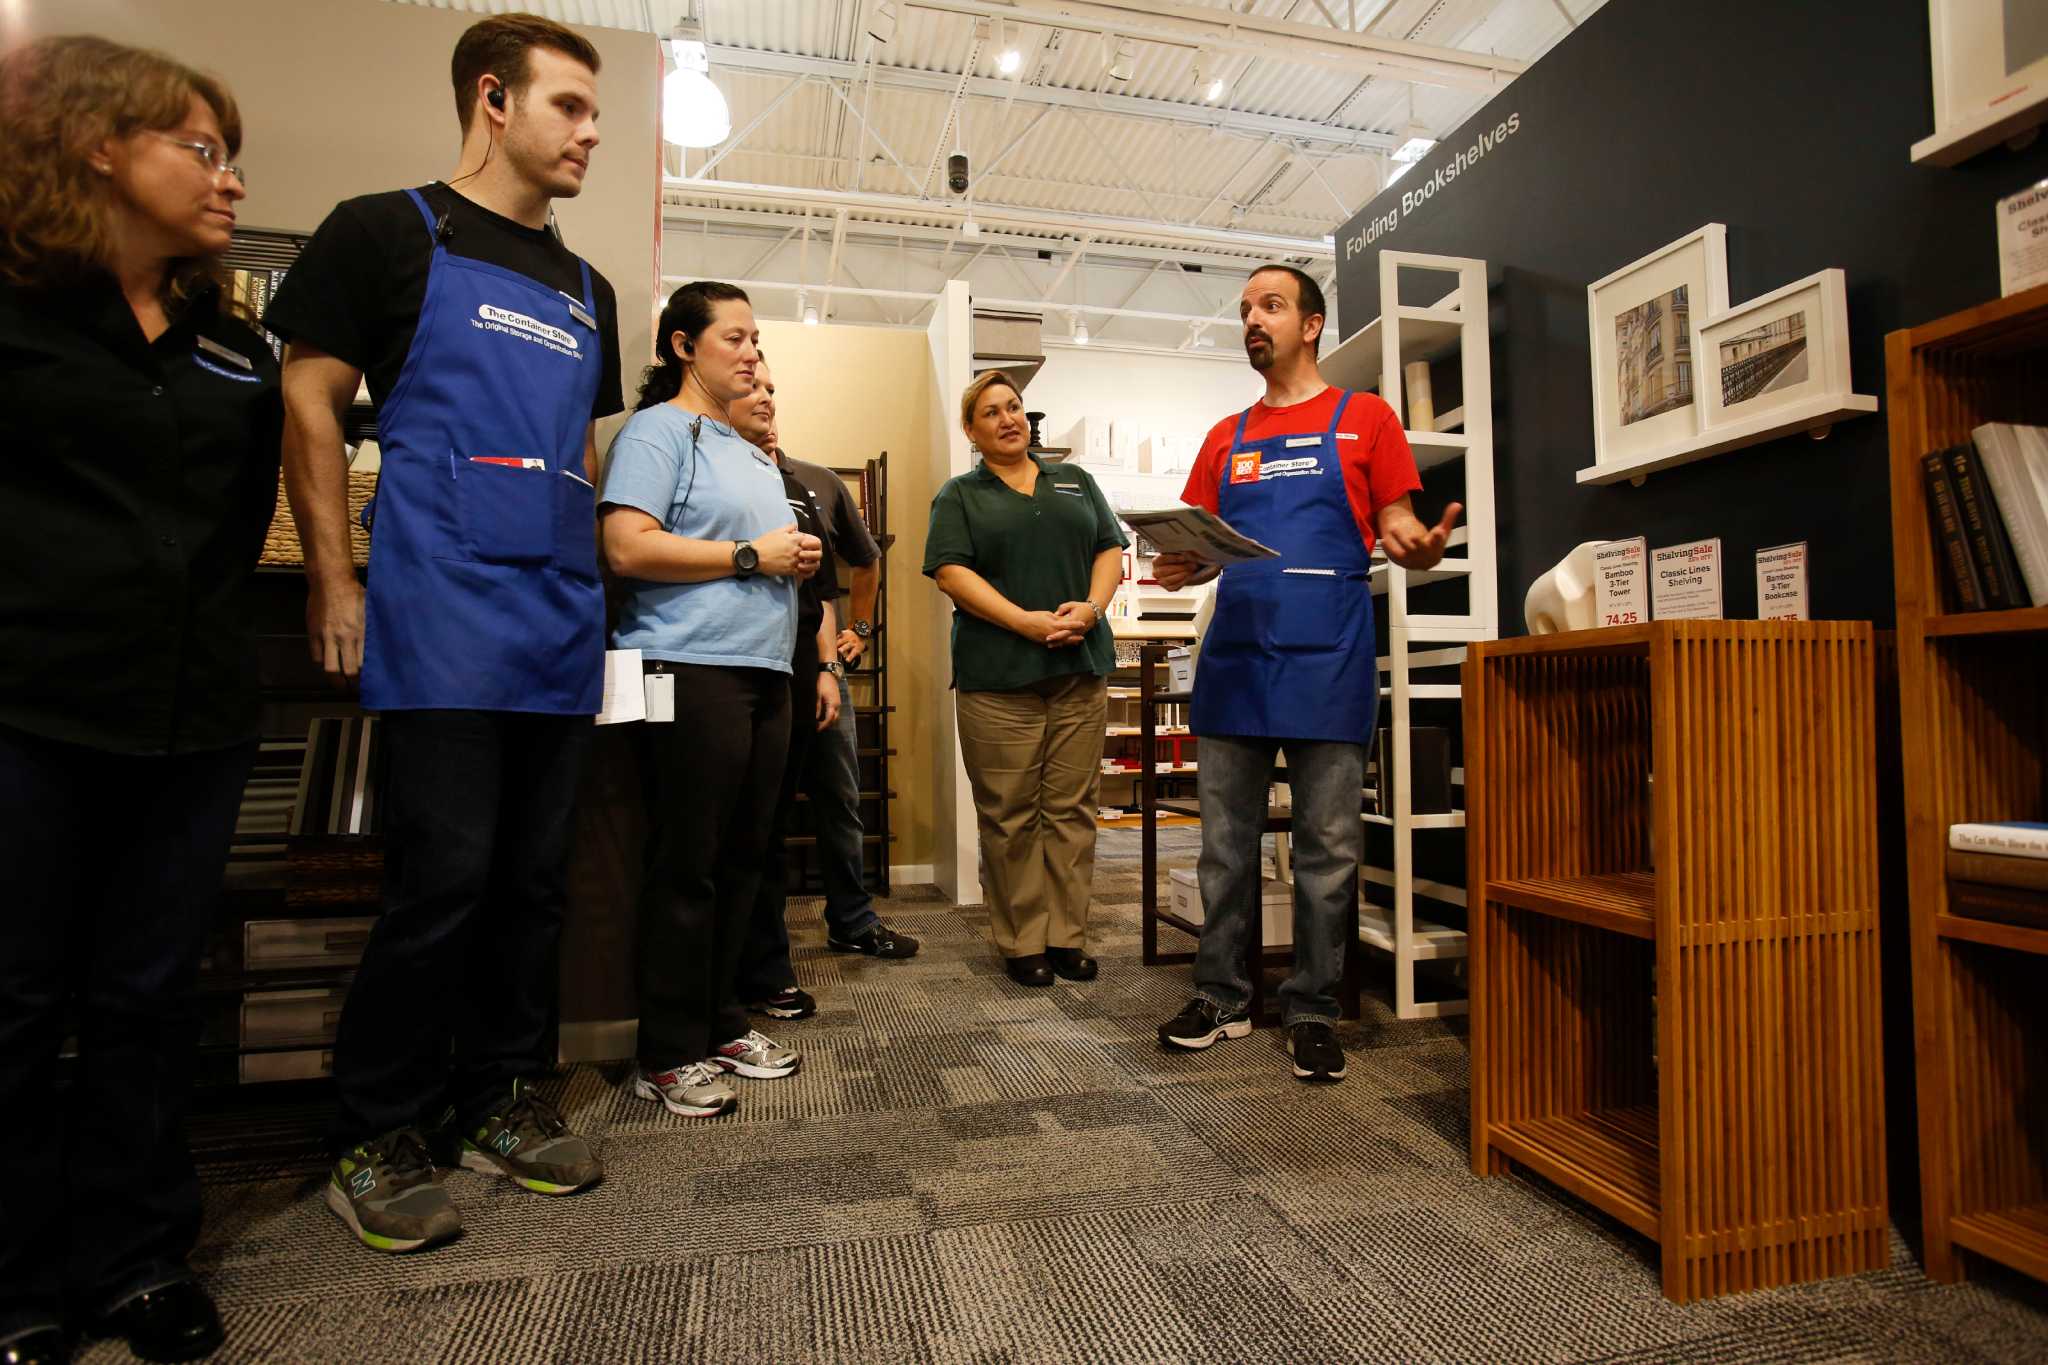 Top Medium Workplaces: Container Store inspires loyalty – The